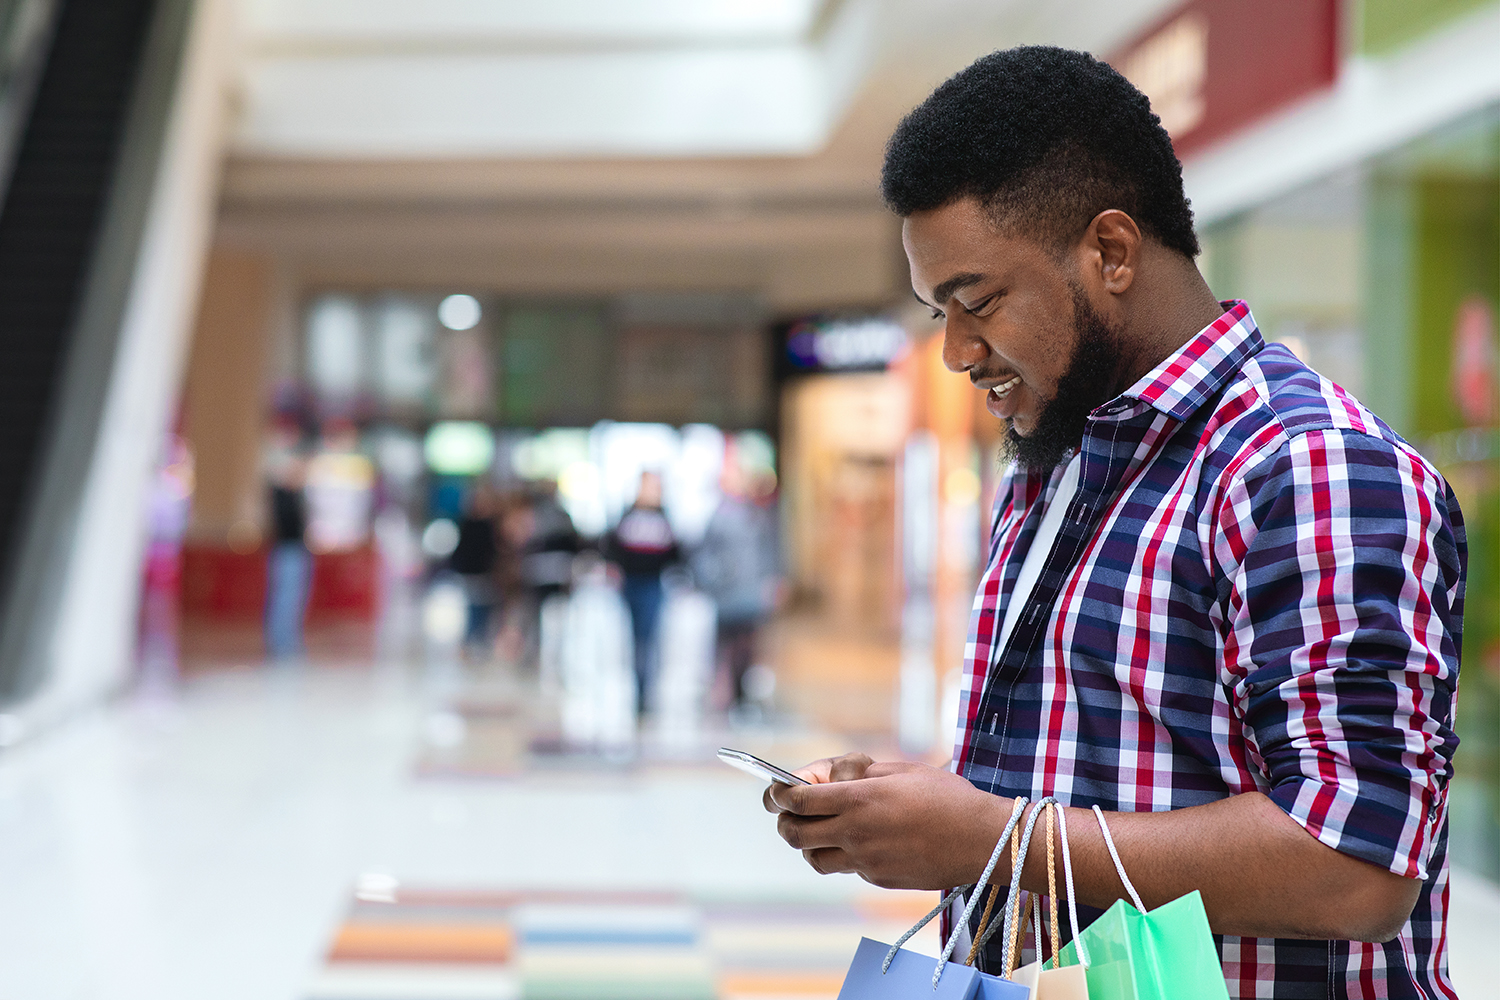 App With Discounts. Smiling Black Man With Shopping Bags Using Smartphone In Mall, Checking Sale Deals, Side View With Free Space